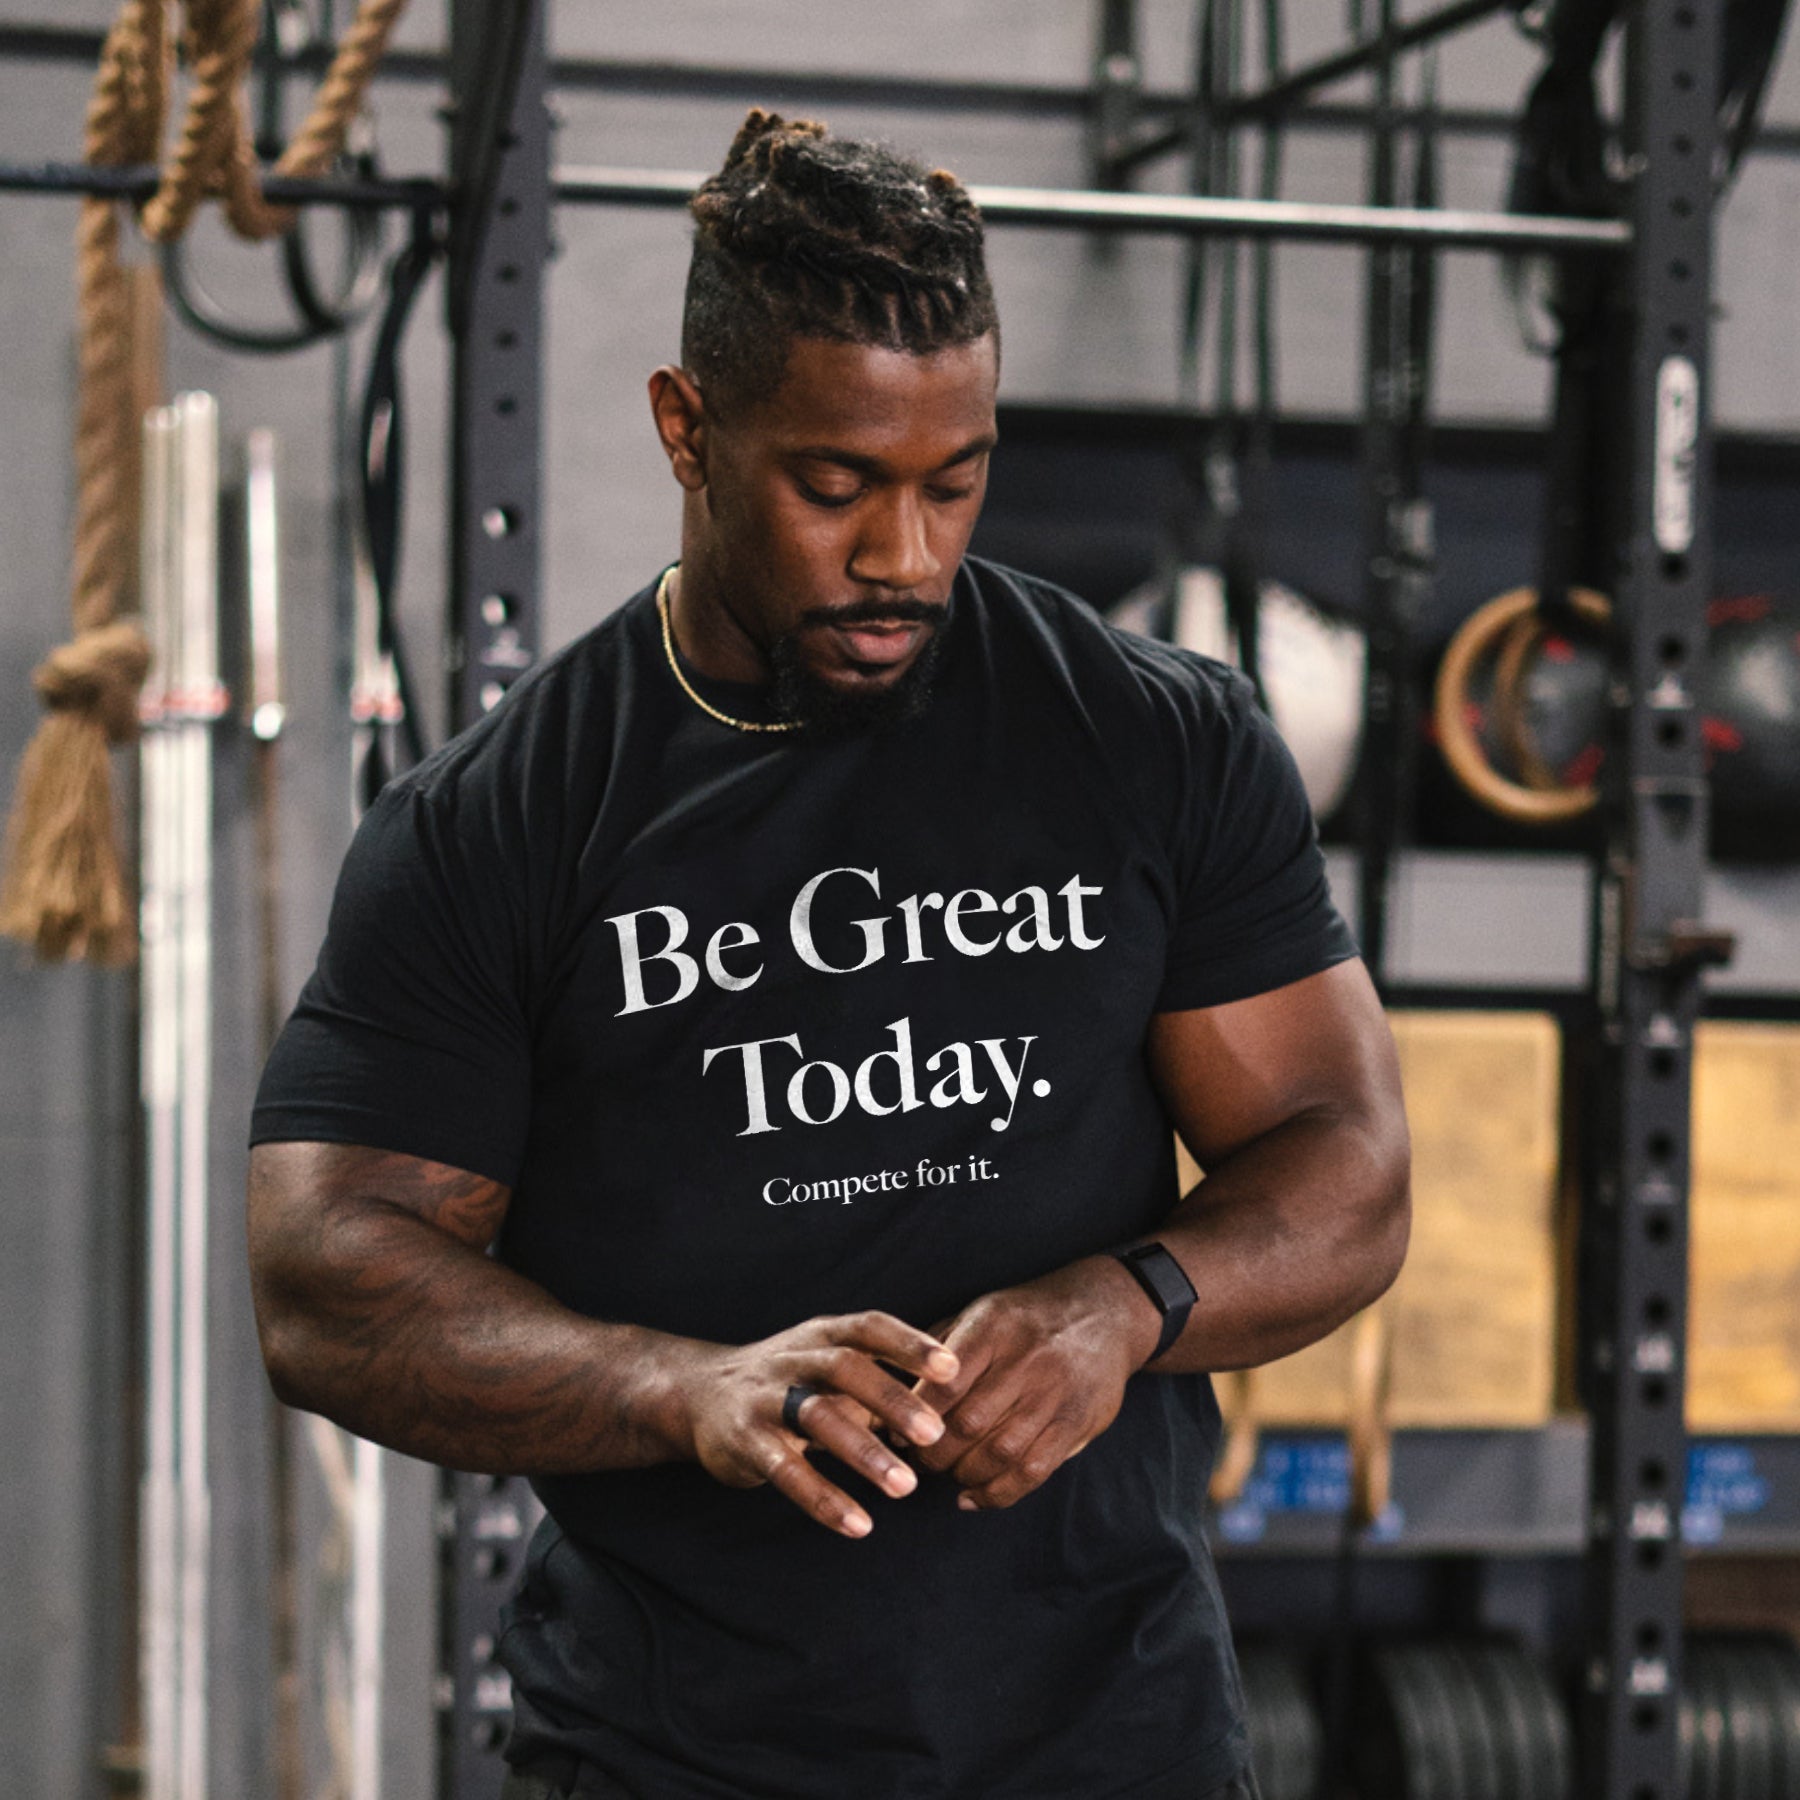 Be Great Today Print Men's T-shirt